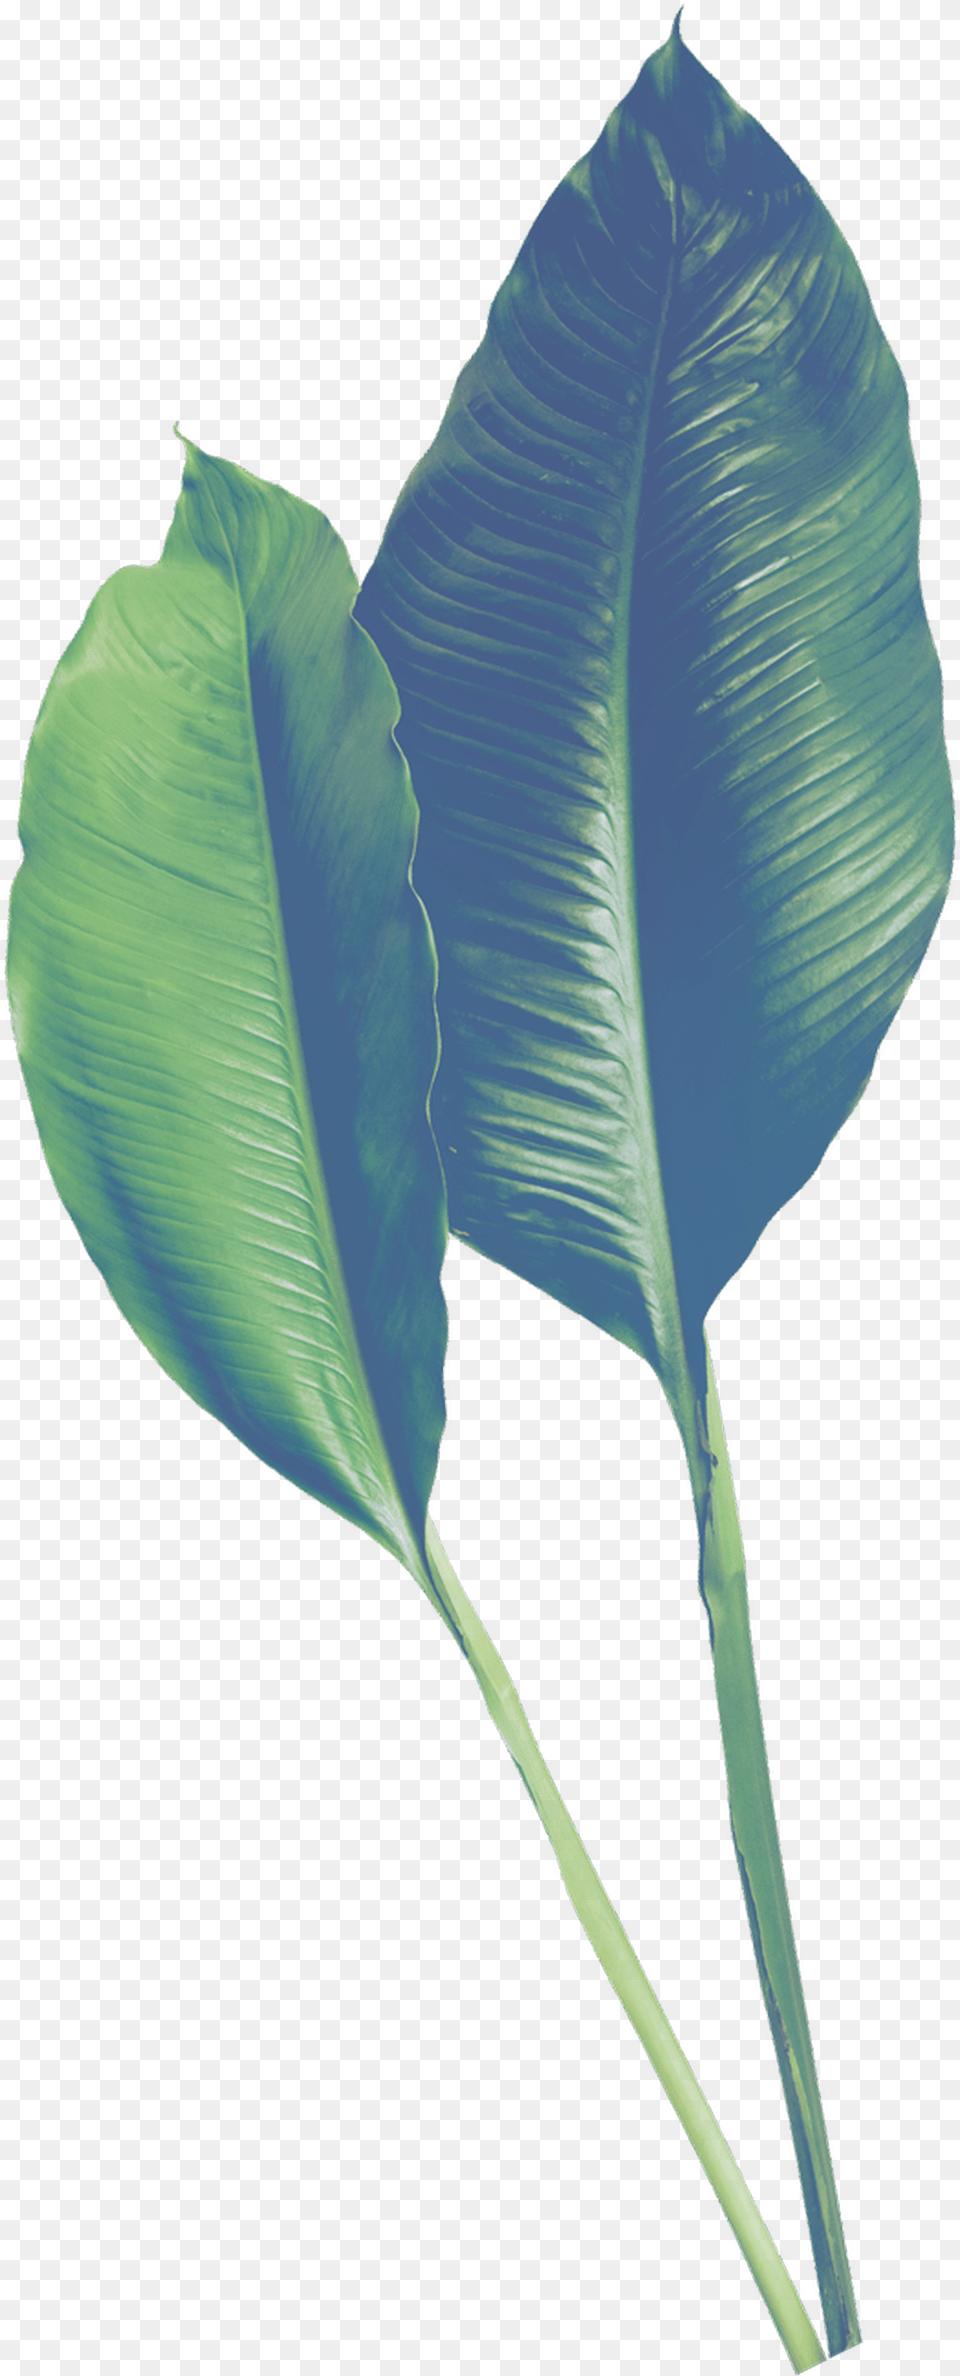 Hand Painted Realistic Banana Leaf Portable Network Graphics, Plant Free Transparent Png